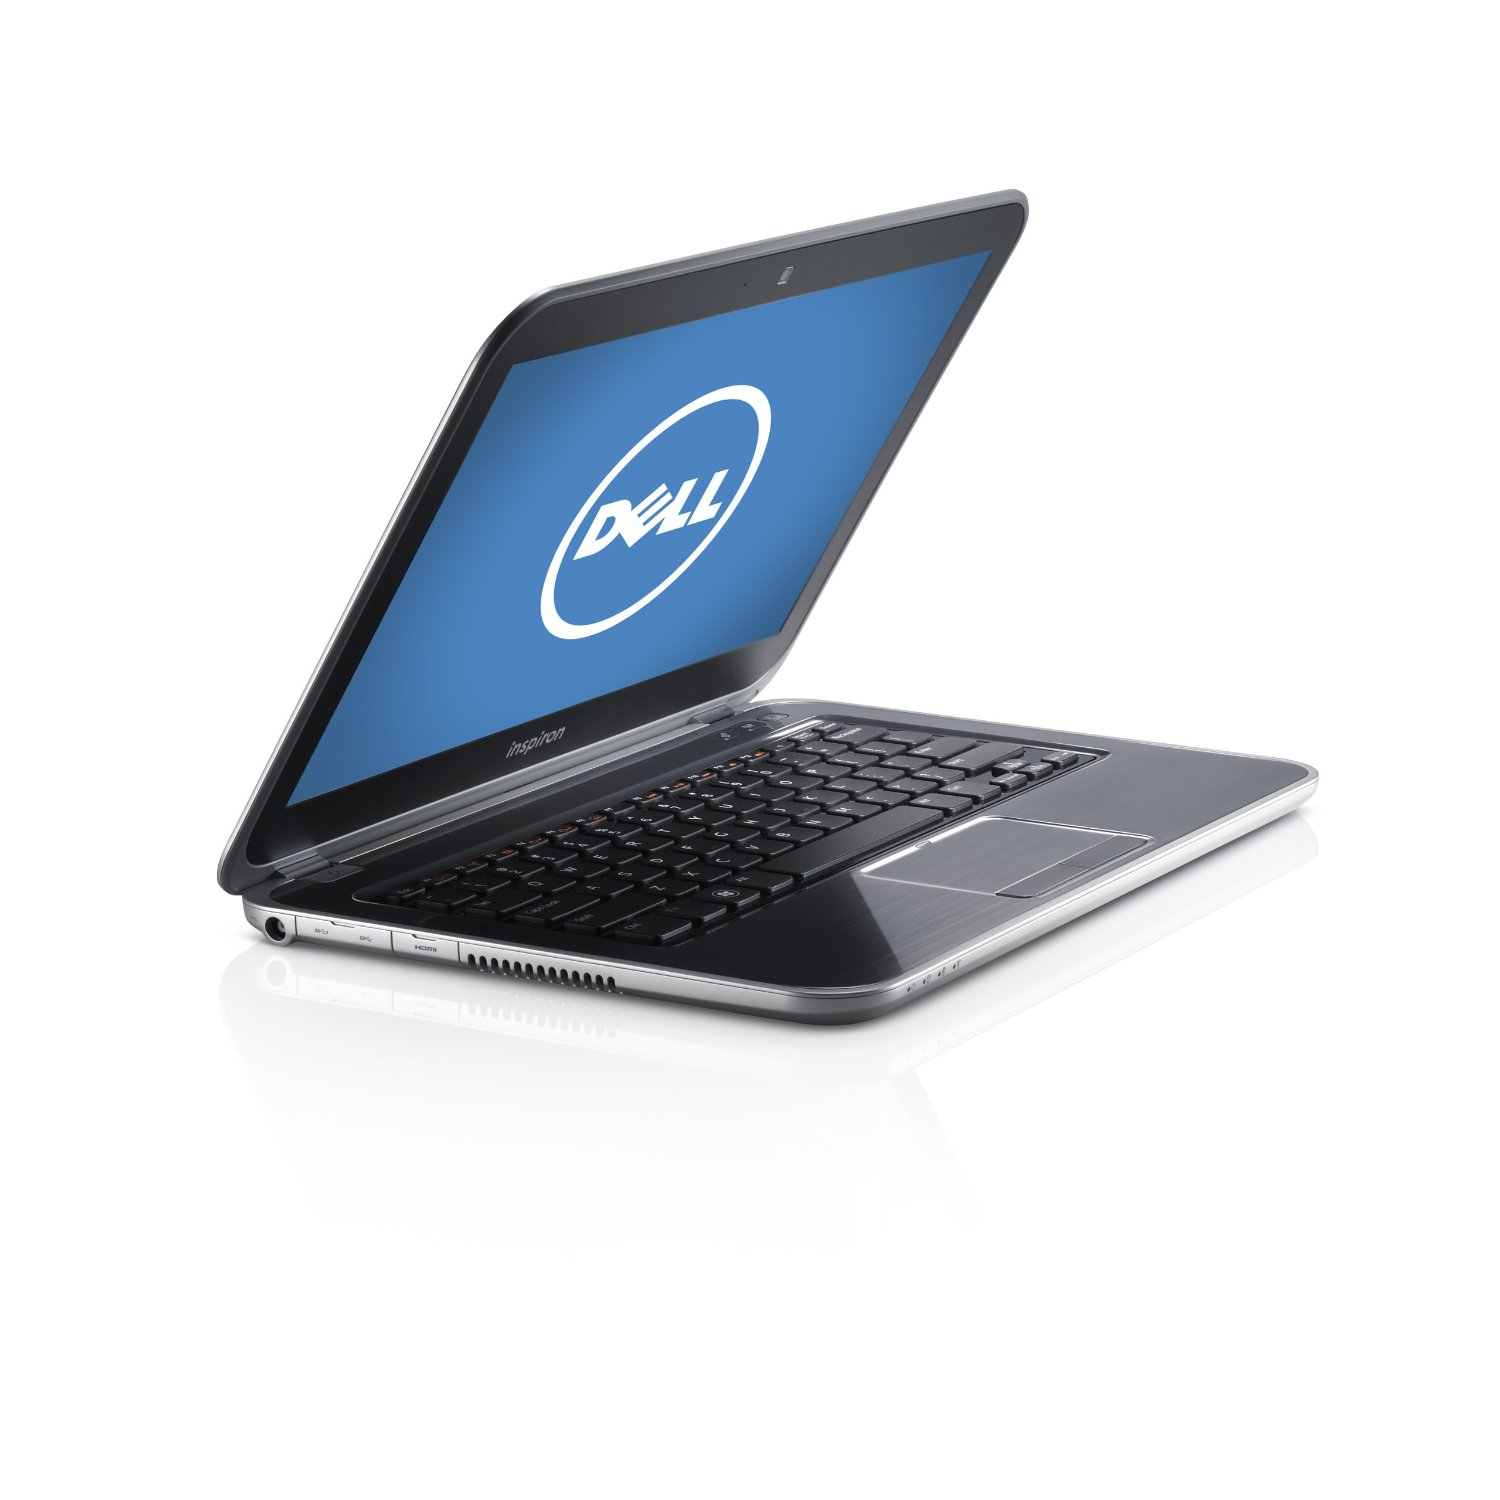 http://thetechjournal.com/wp-content/uploads/images/1210/1349897573-dell-inspiron-13z-13inch-laptop-7.jpg